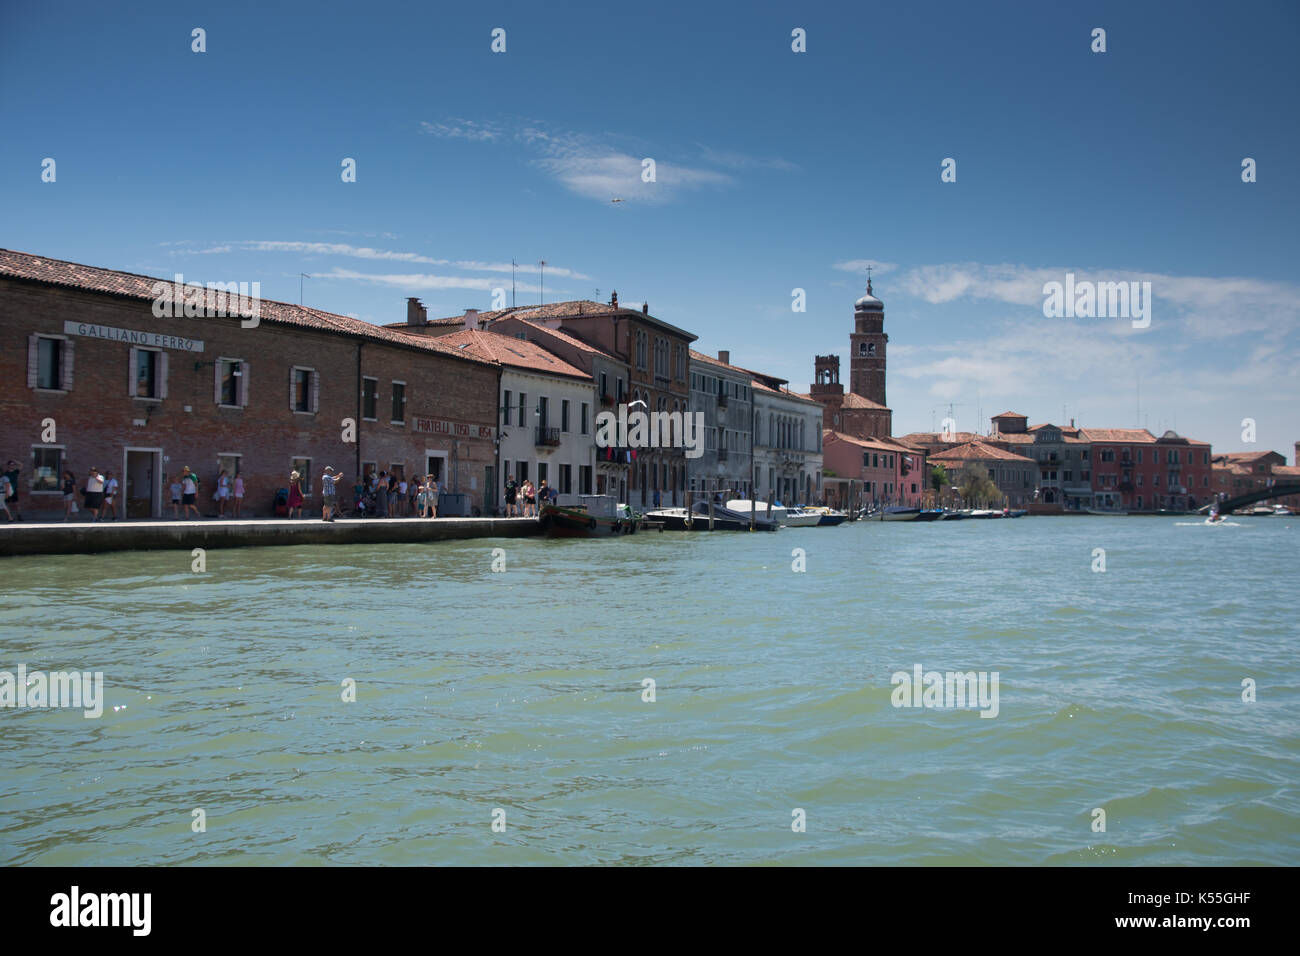 A trip to the ancient city of Venice, Romantic getaway in the sea , picturesque buildings, canals and waterways Stock Photo